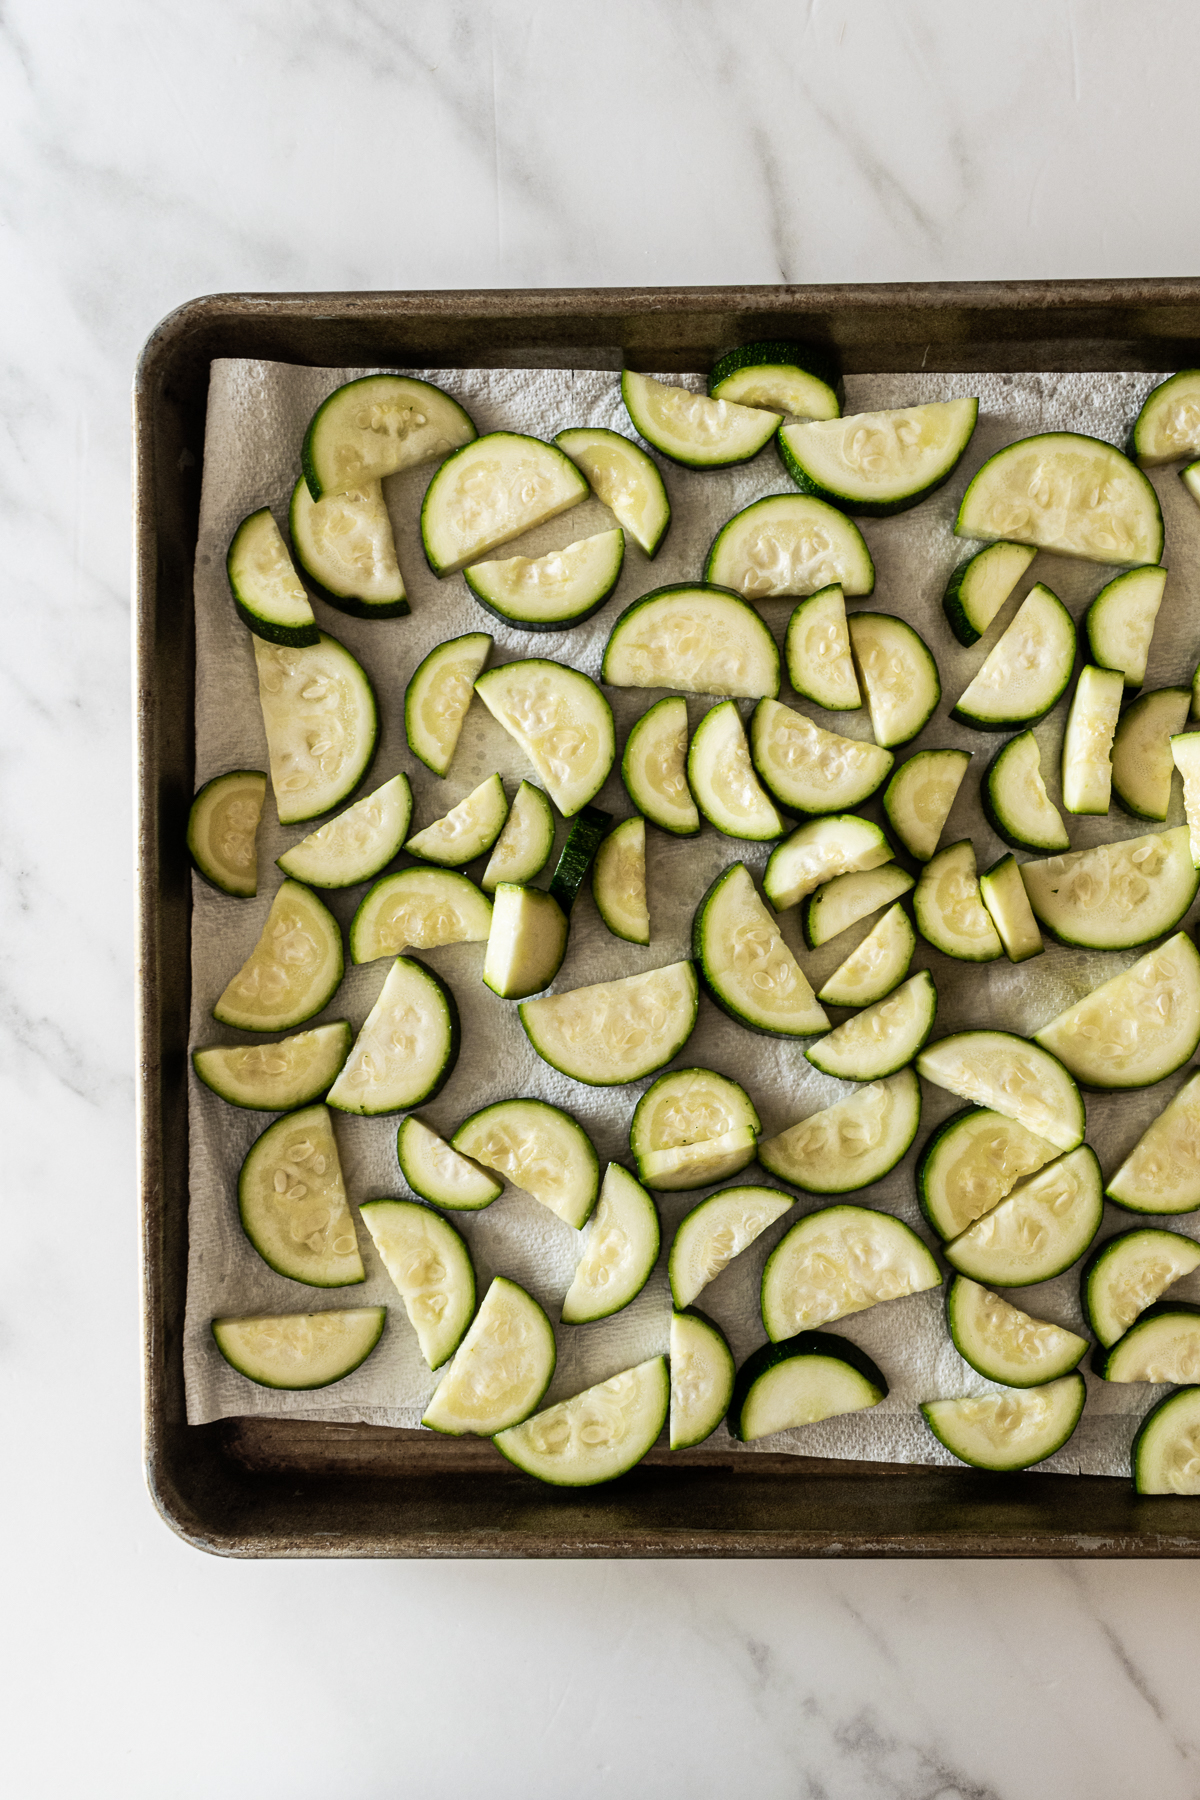 zucchini slices on a paper towel-lined baking sheet.